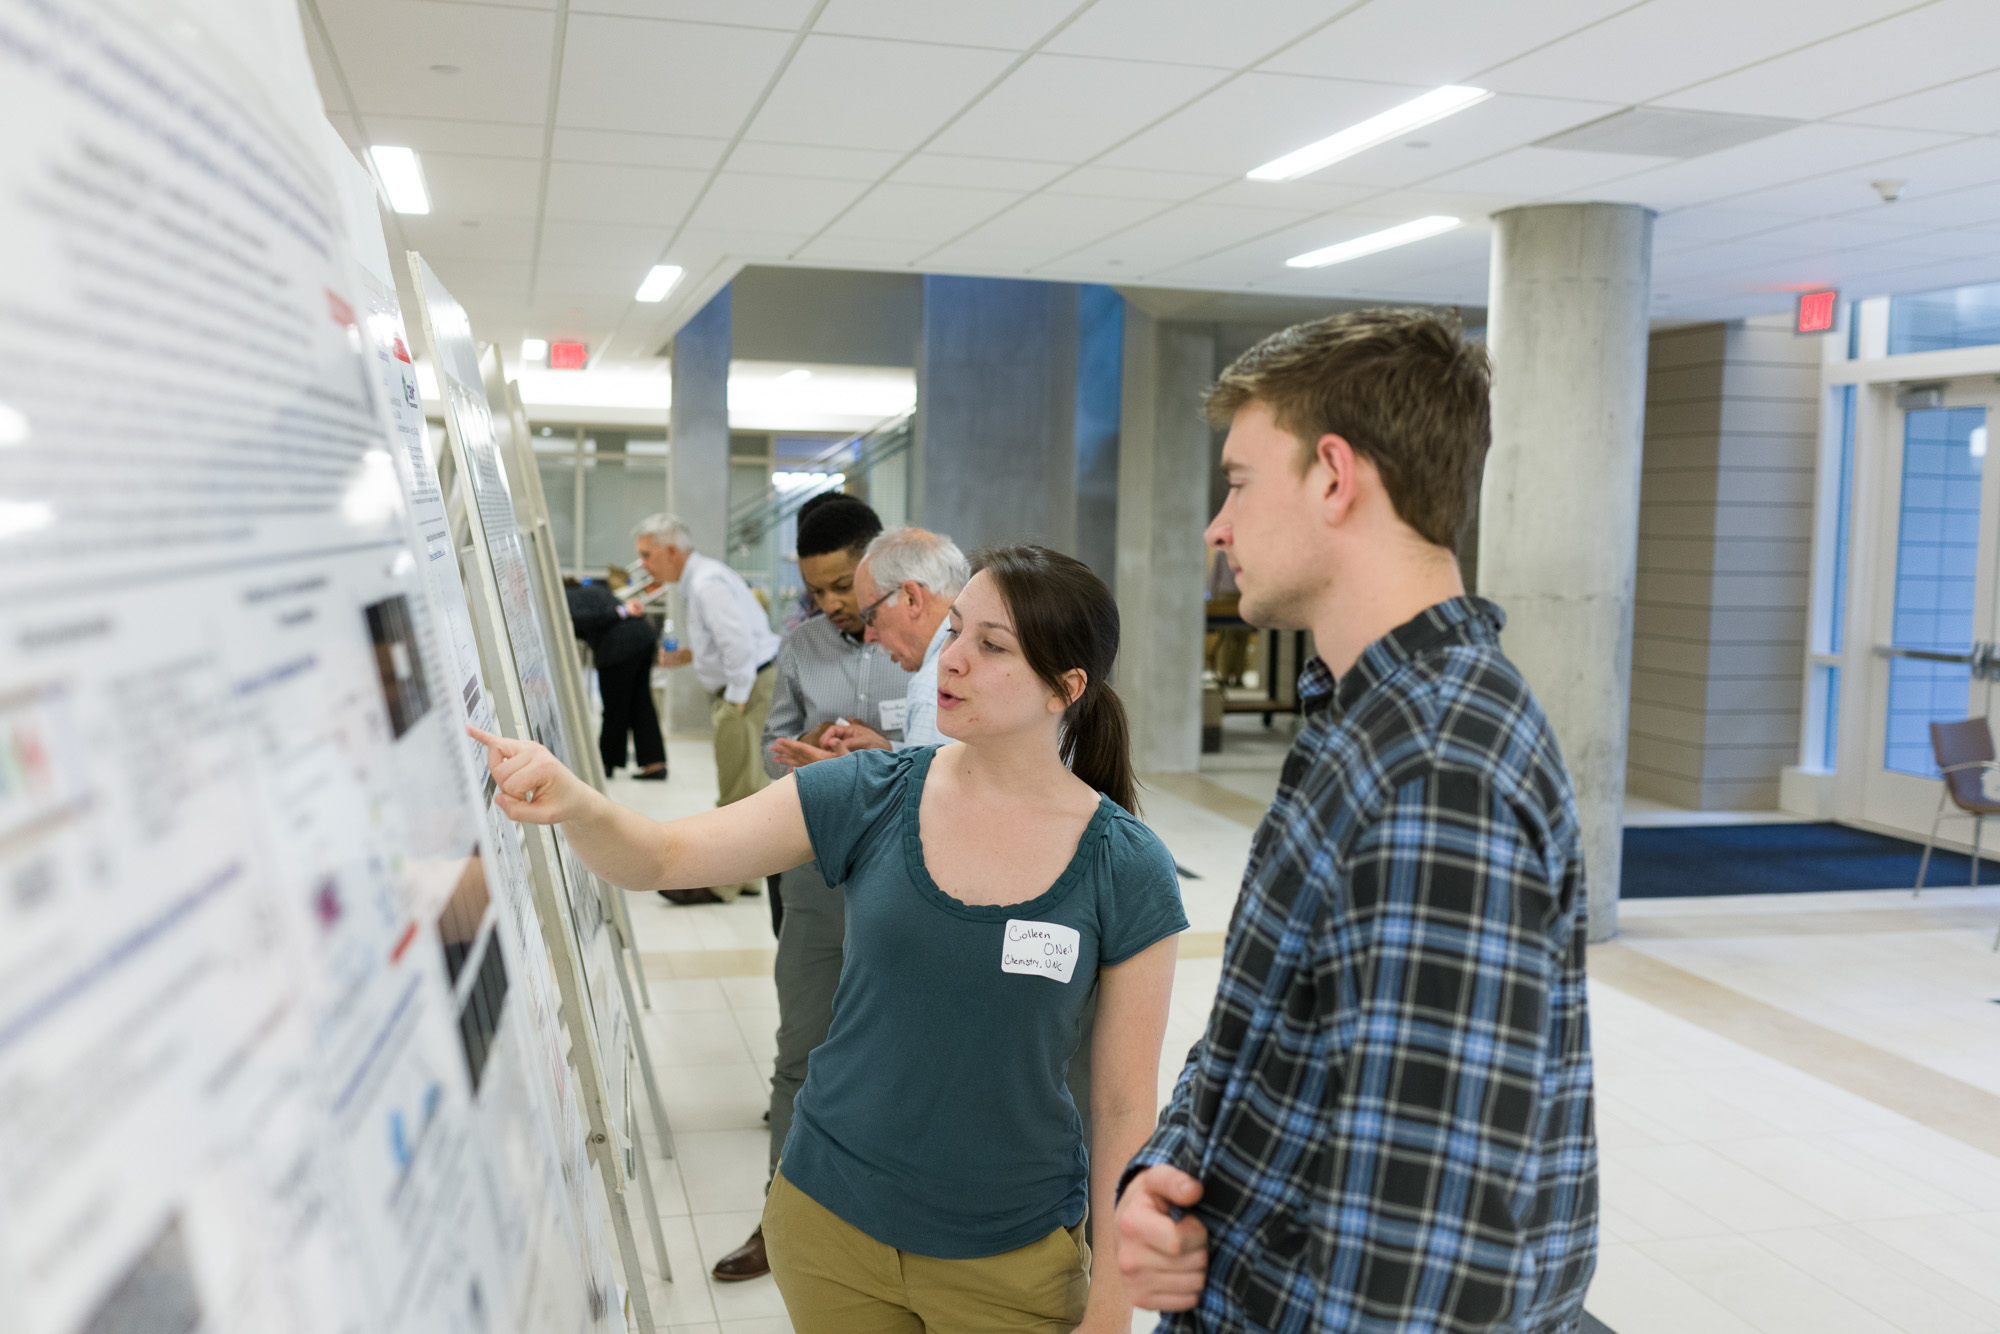 A woman with a name tag 'Caitlin Oke, University' points at a poster board, discussing its contents with a man beside her. Other attendees are seen examining posters in a well-lit indoor venue.